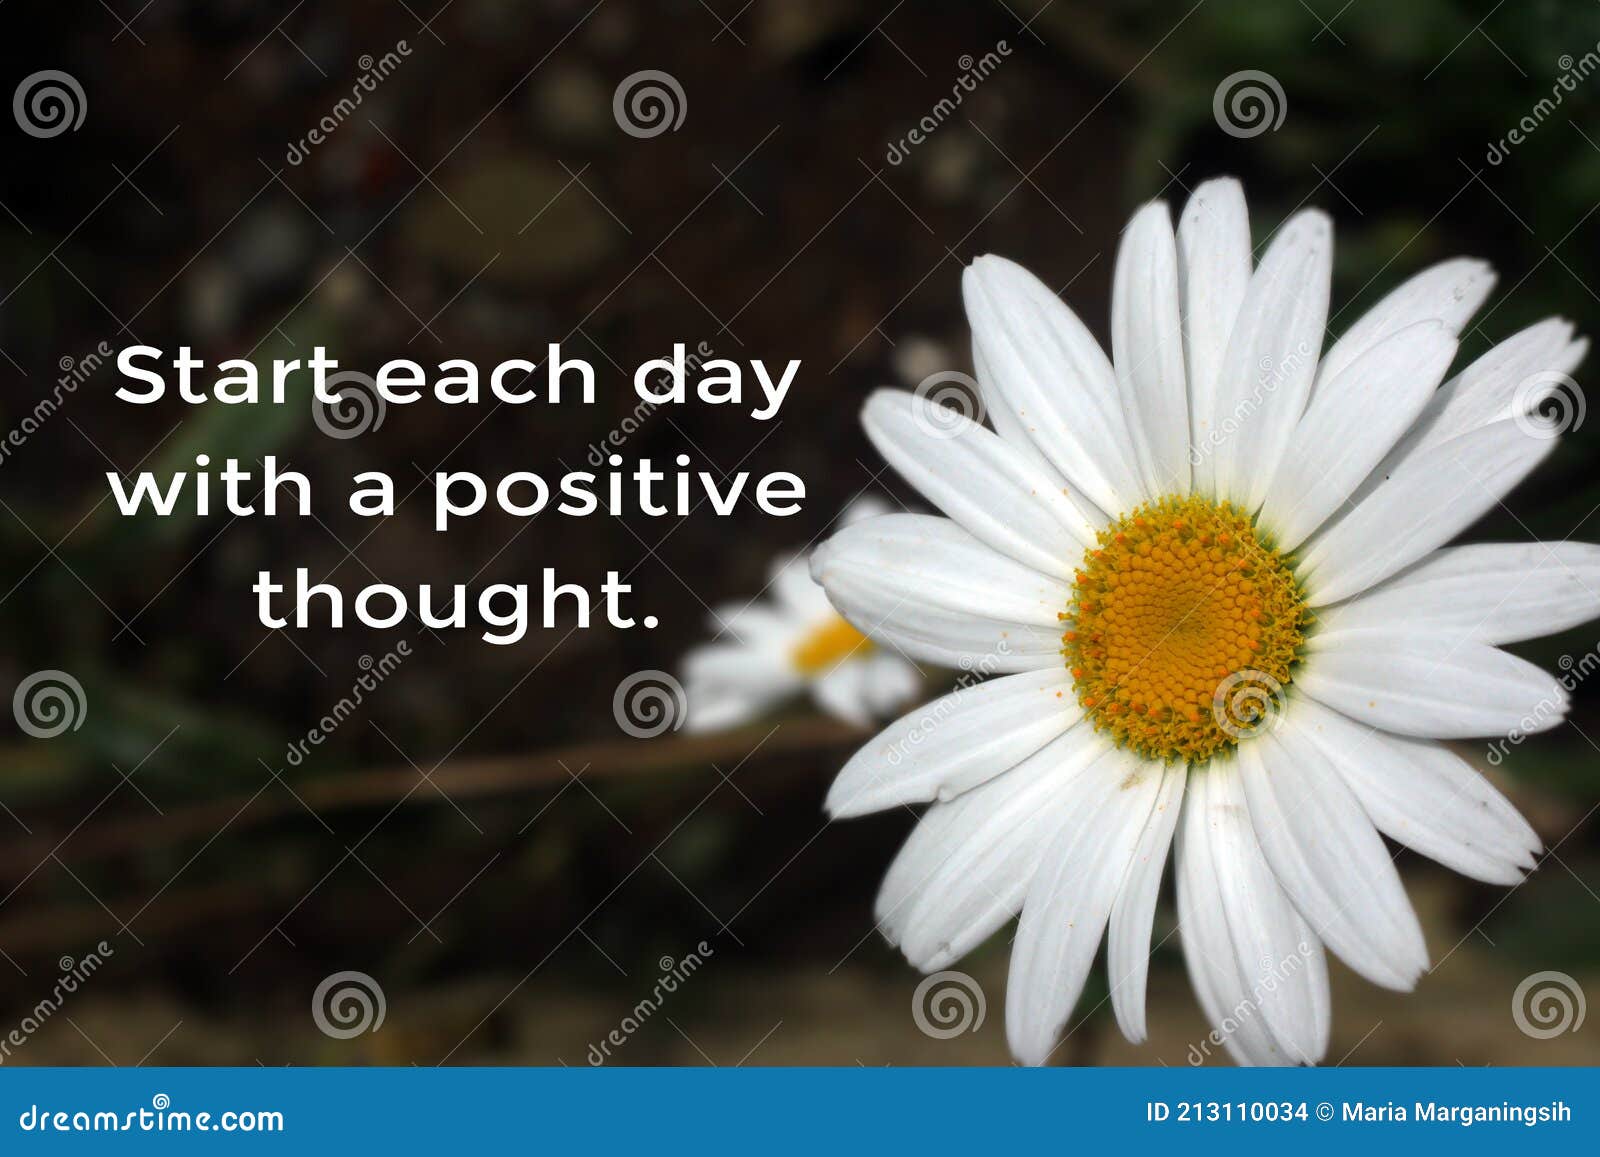 Inspirational Words - Start Each Day with a Positive Thought ...